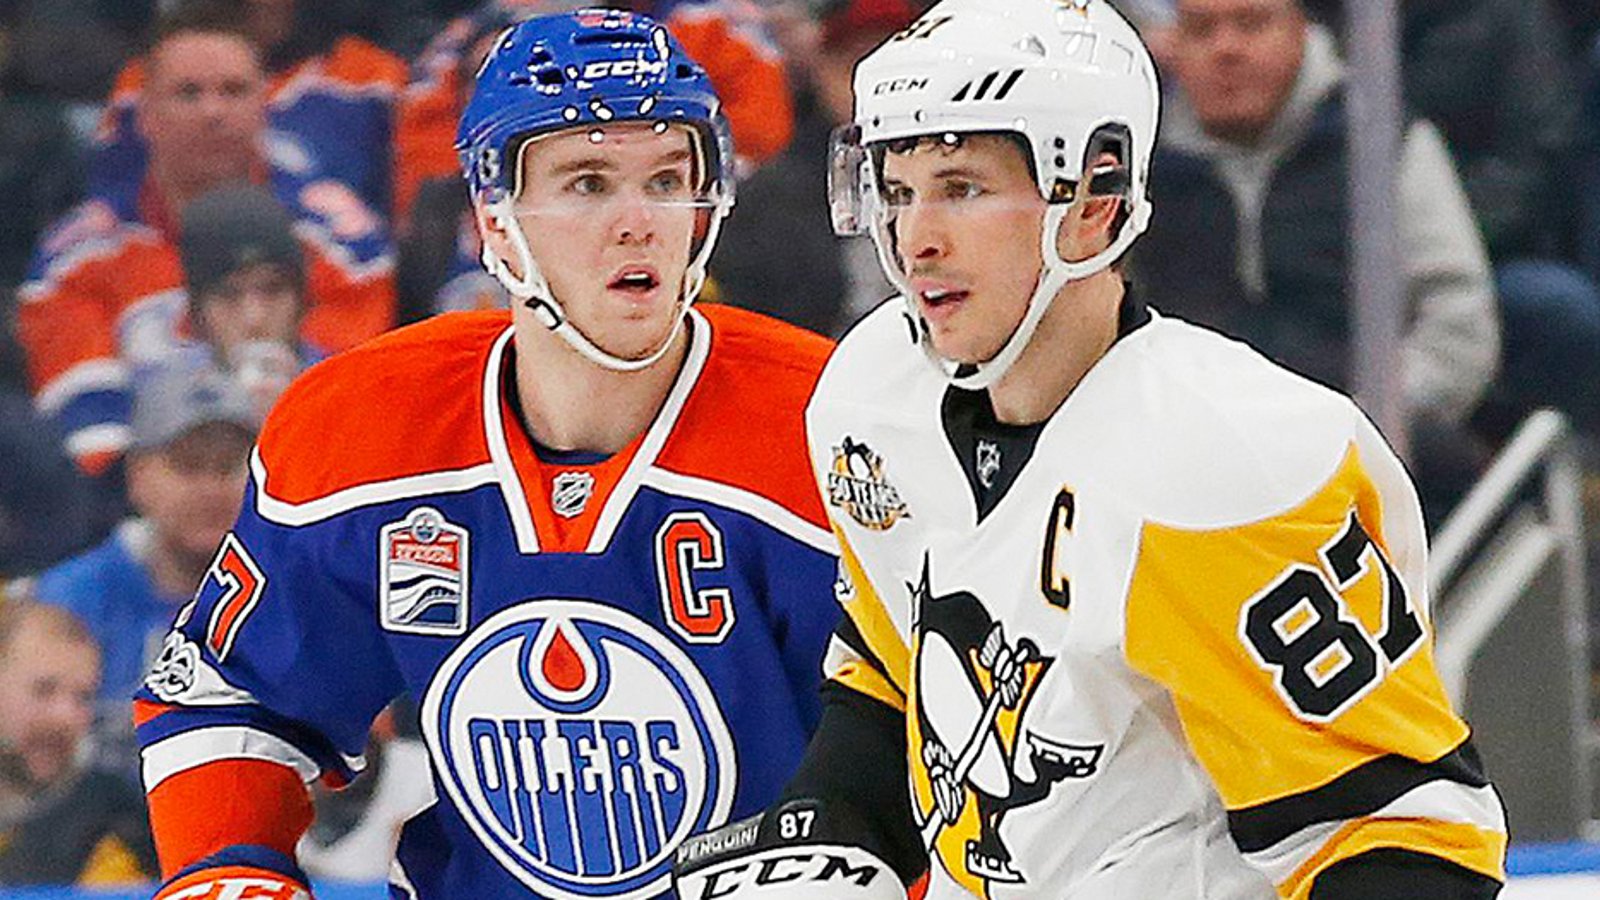 Connor McDavid describes his 'dream come true' of playing with Sidney Crosby 